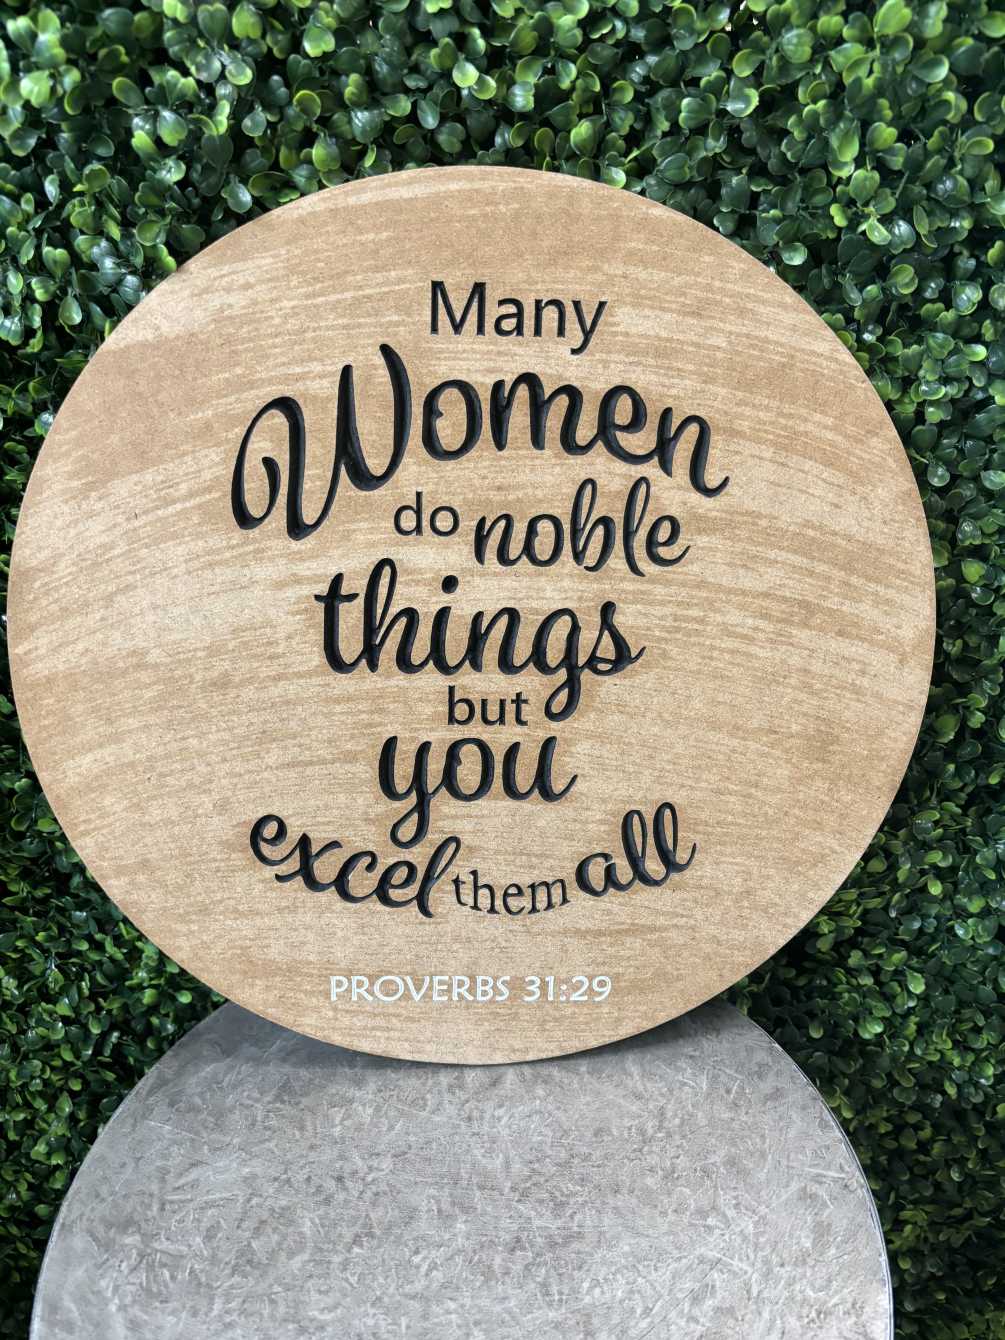 &quot;Many women do noble things but you excel them all. Proverbs 31:29&quot;